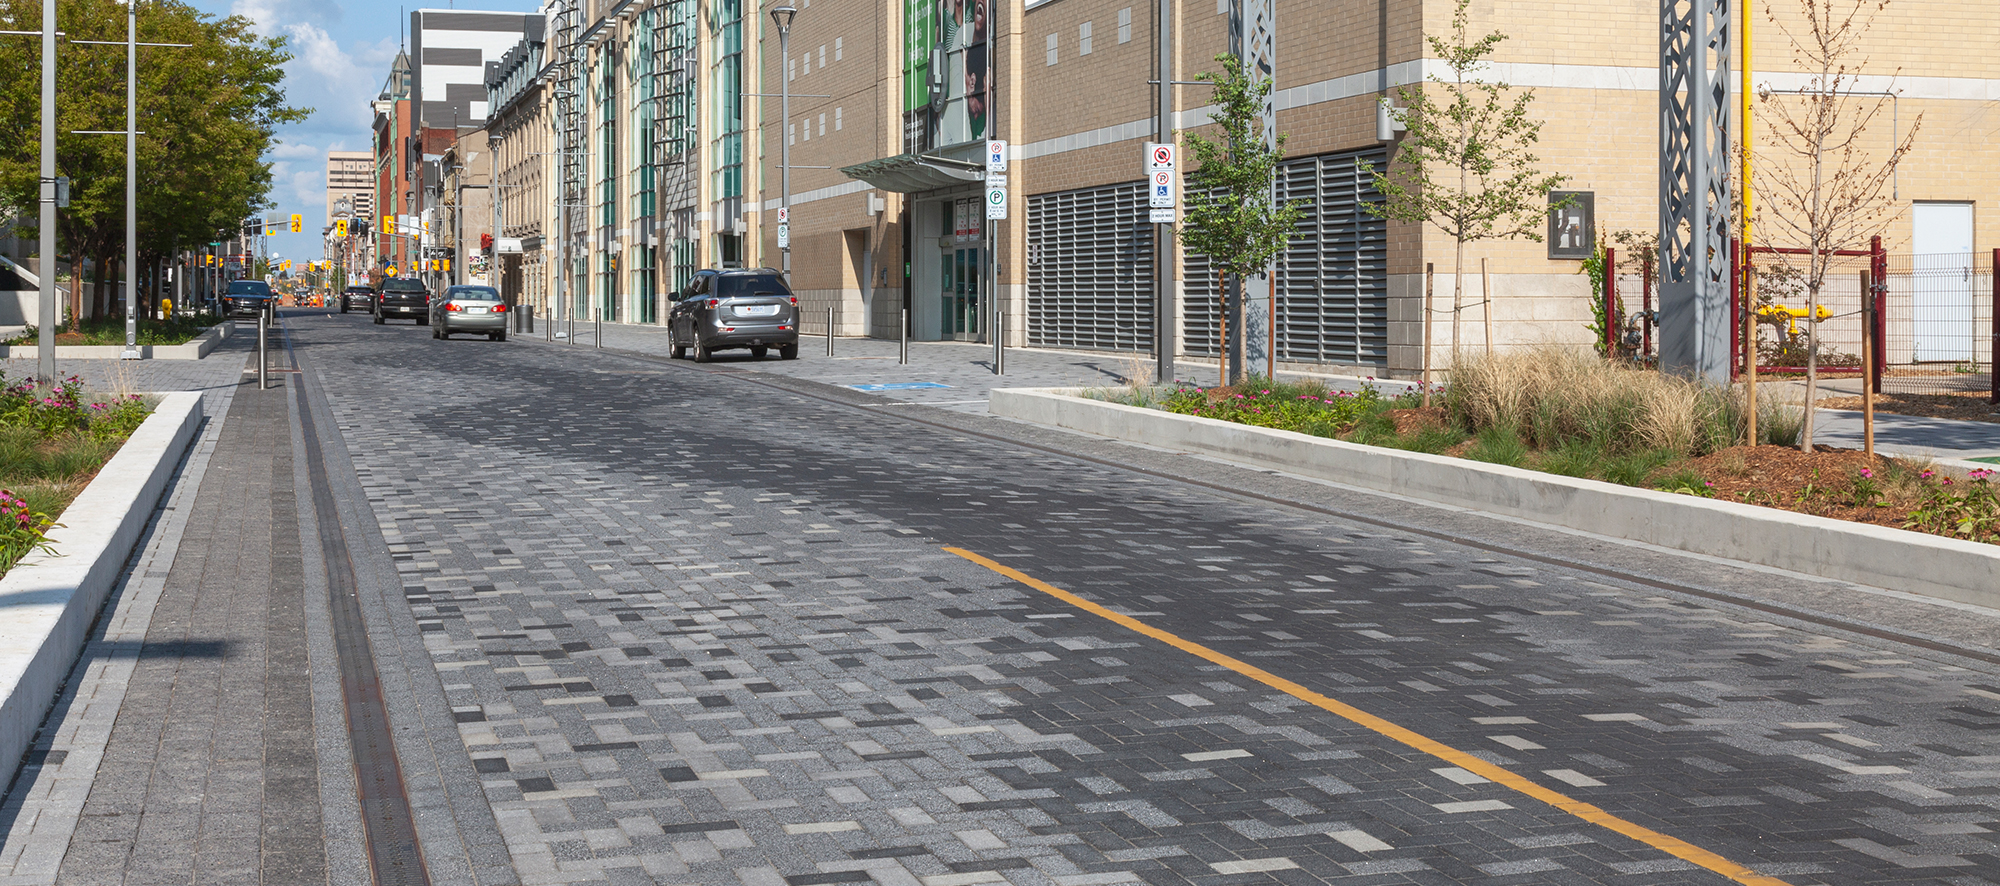 Dundas Place streetscape features Series pavers in pixelated patterns, a curvy zig-zag in the center, and garden beds on either side.